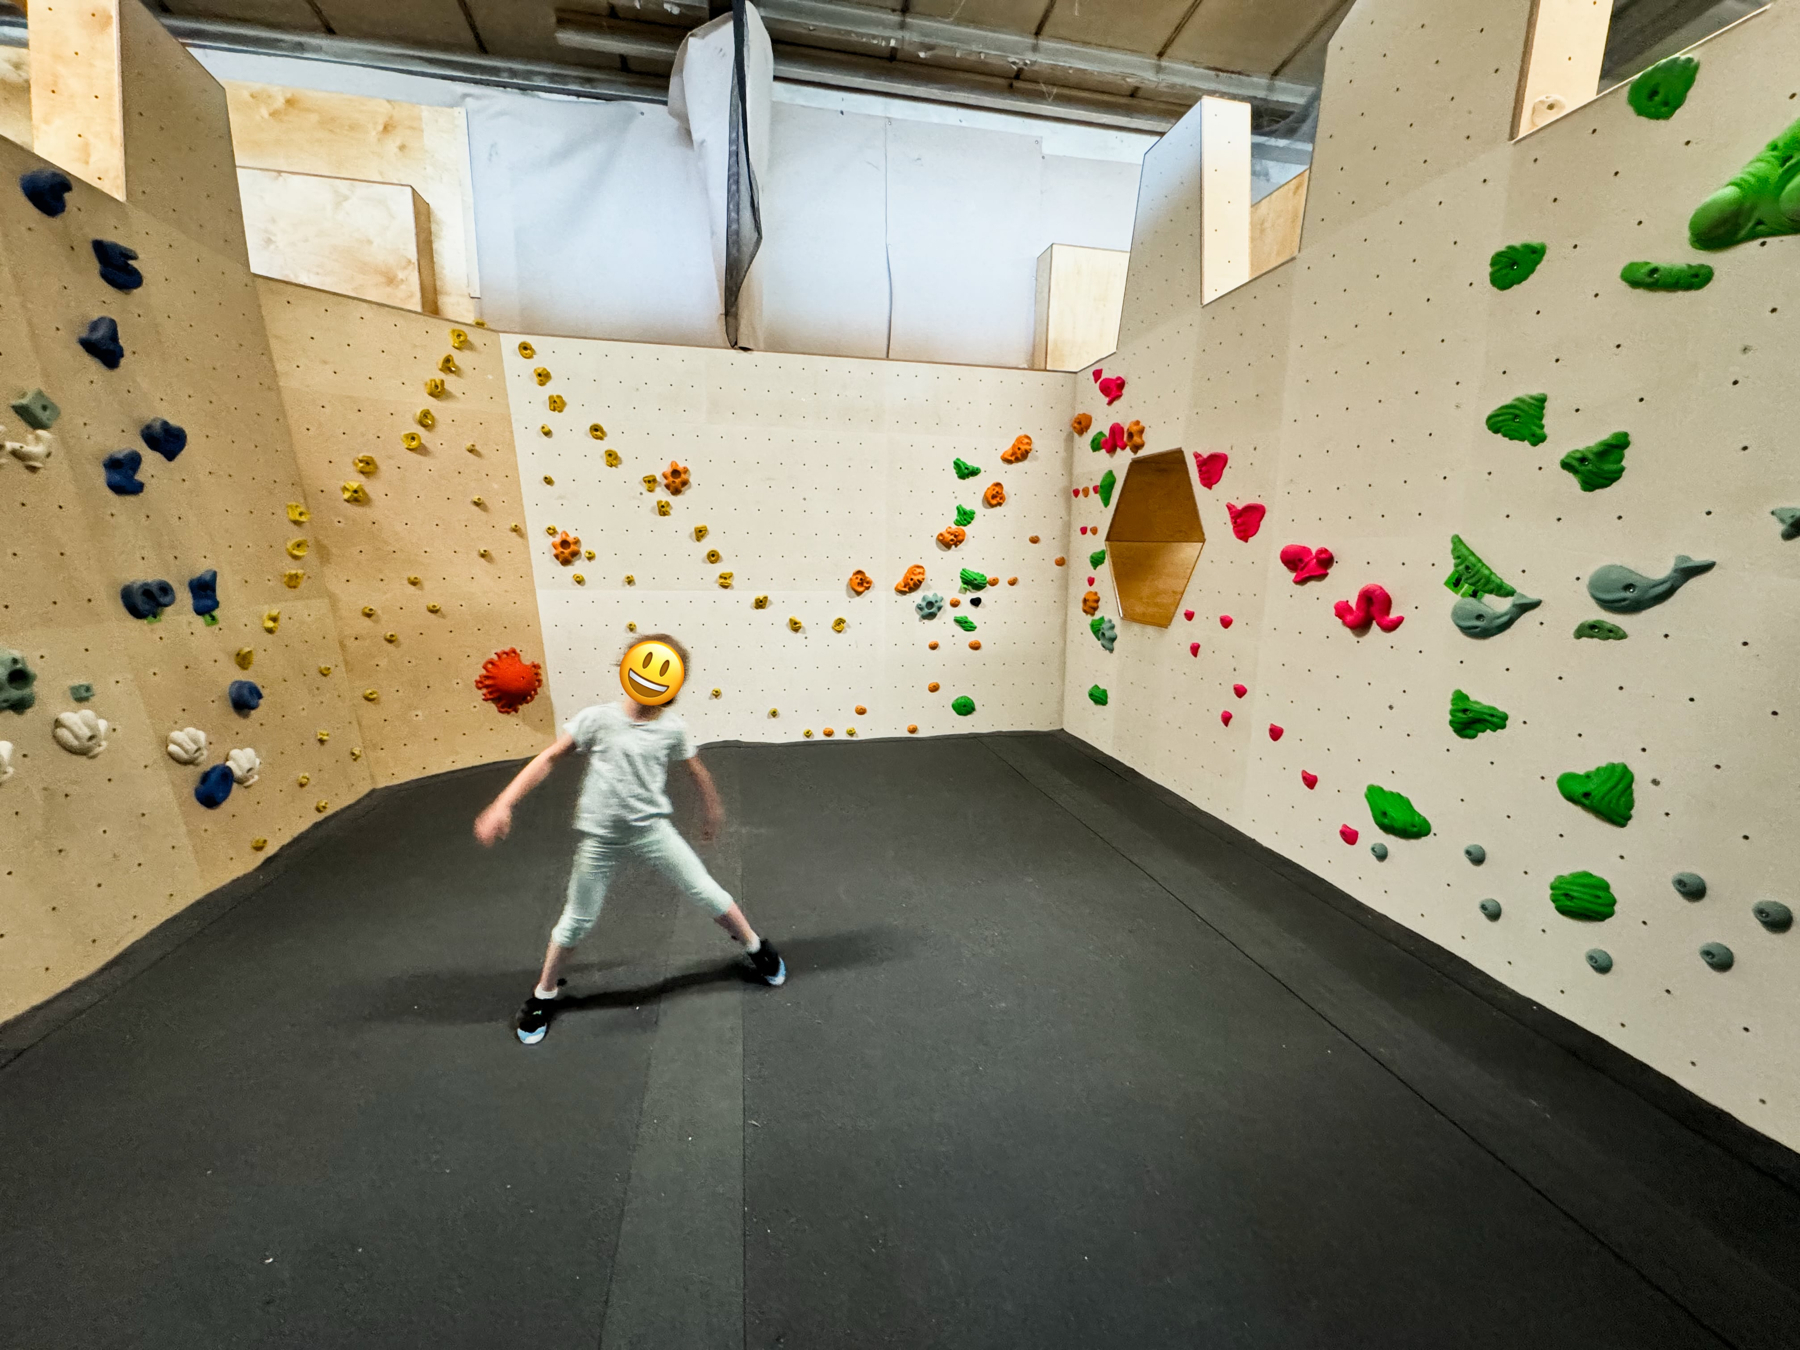 A child standing inside an indoor rock climbing gym, wearing a smiley face emoji over their face. The climbing walls feature various colored holds in blue, yellow, orange, pink, green, and gray. There is a hexagonal wooden structure inset into